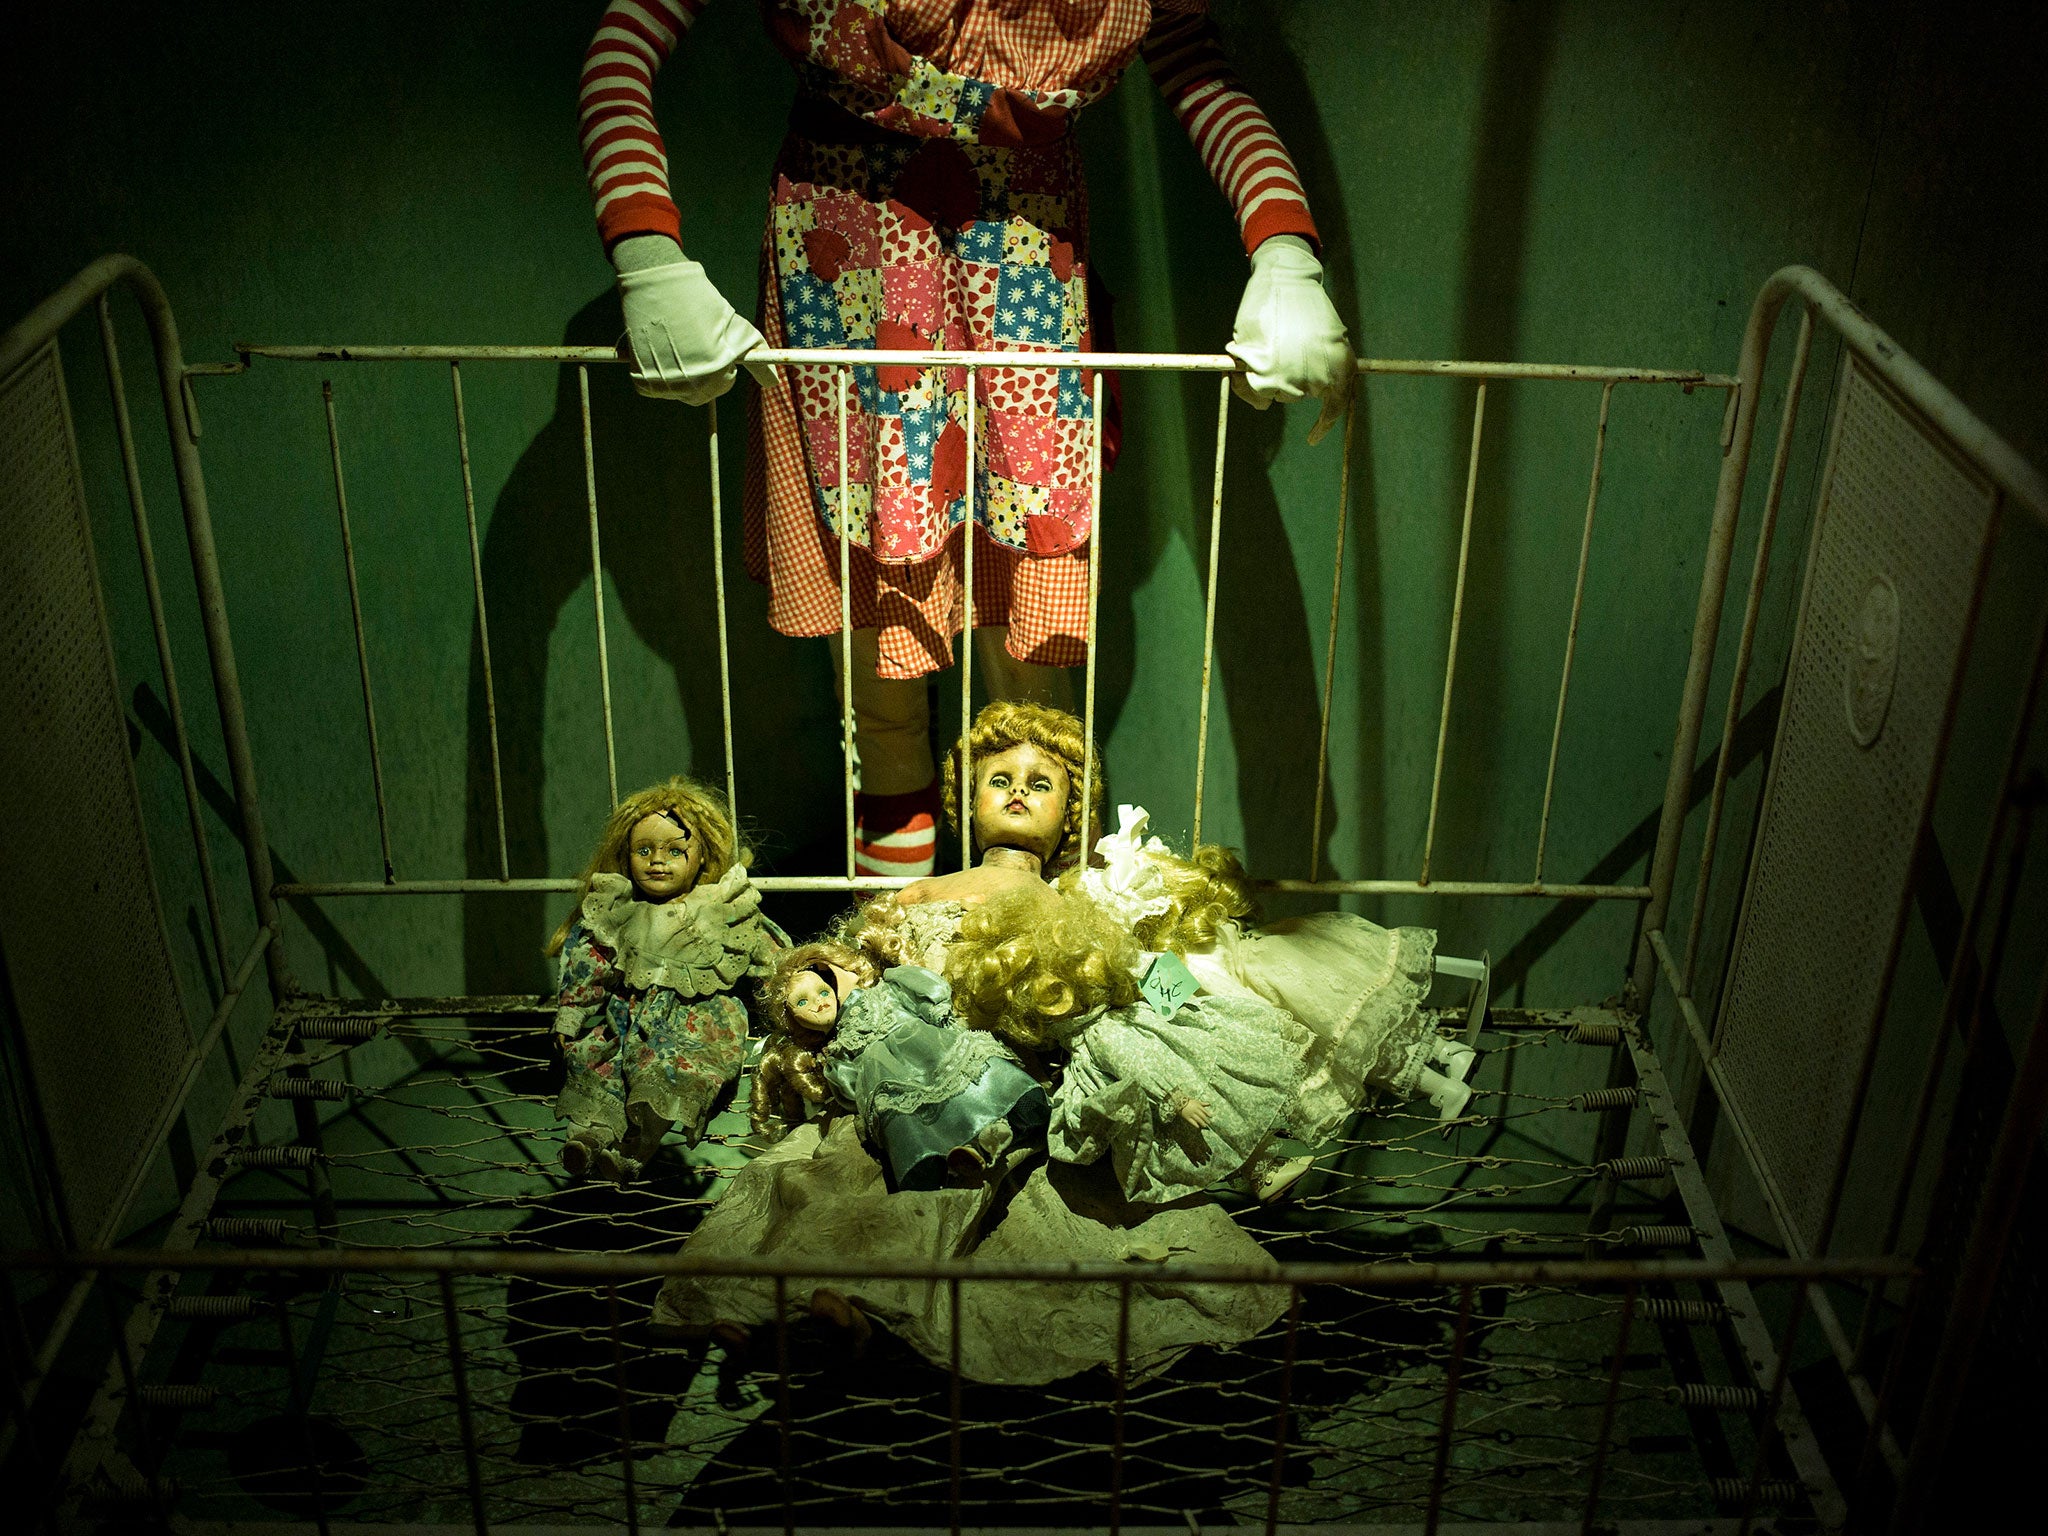 Dolls aren't conscious beings...so why are they so unnerving?